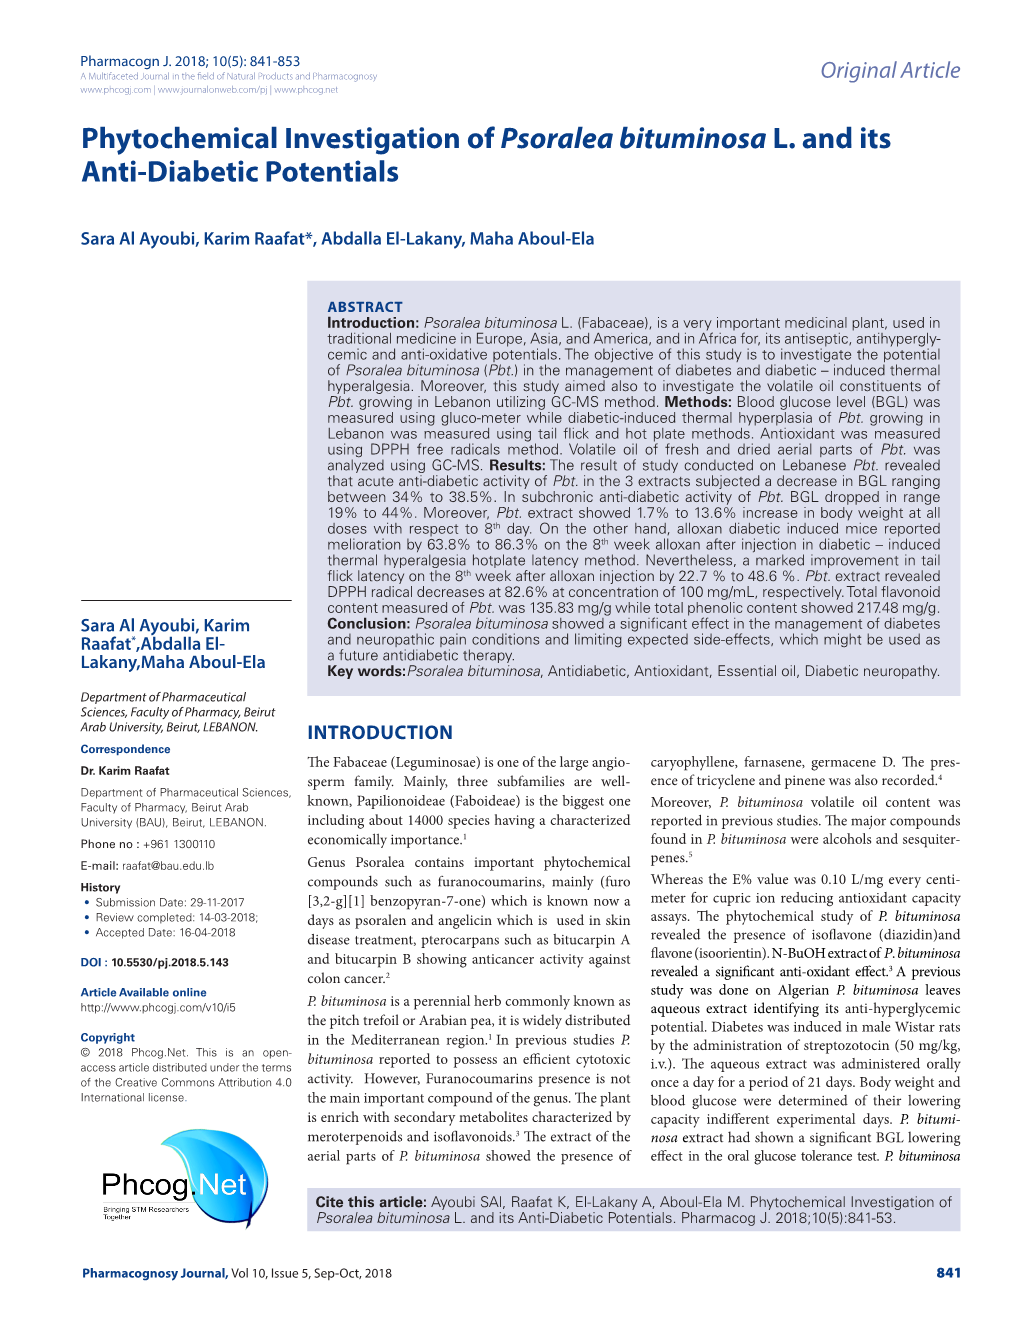 Phytochemical Investigation of Psoralea Bituminosa L. and Its Anti-Diabetic Potentials